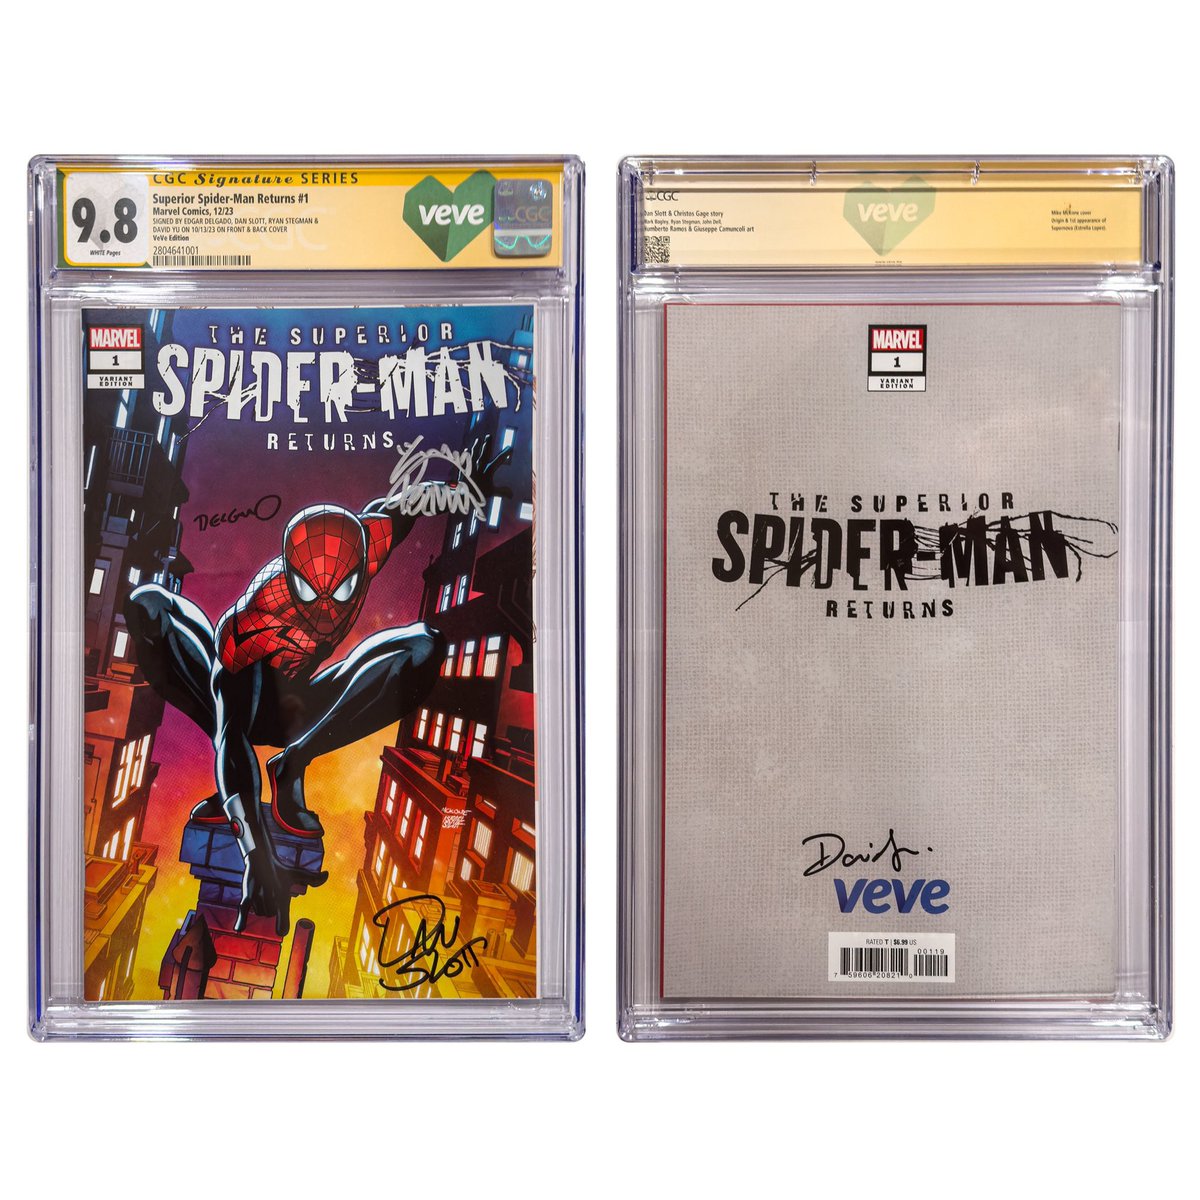 🚨FIRST VEVE CGC COMIC GIVEAWAY 🚨 We are giving away a CGC 9.8 yellow label of Superior Spider-Man Returns #1 with the FIRST EVER VeVe CGC comic label! The comic is CGC graded 9.8 with witness signatures by Edgar Delgado, Dan Slott, Ryan Stegman, and VeVe CEO, @DavidYuNZ!